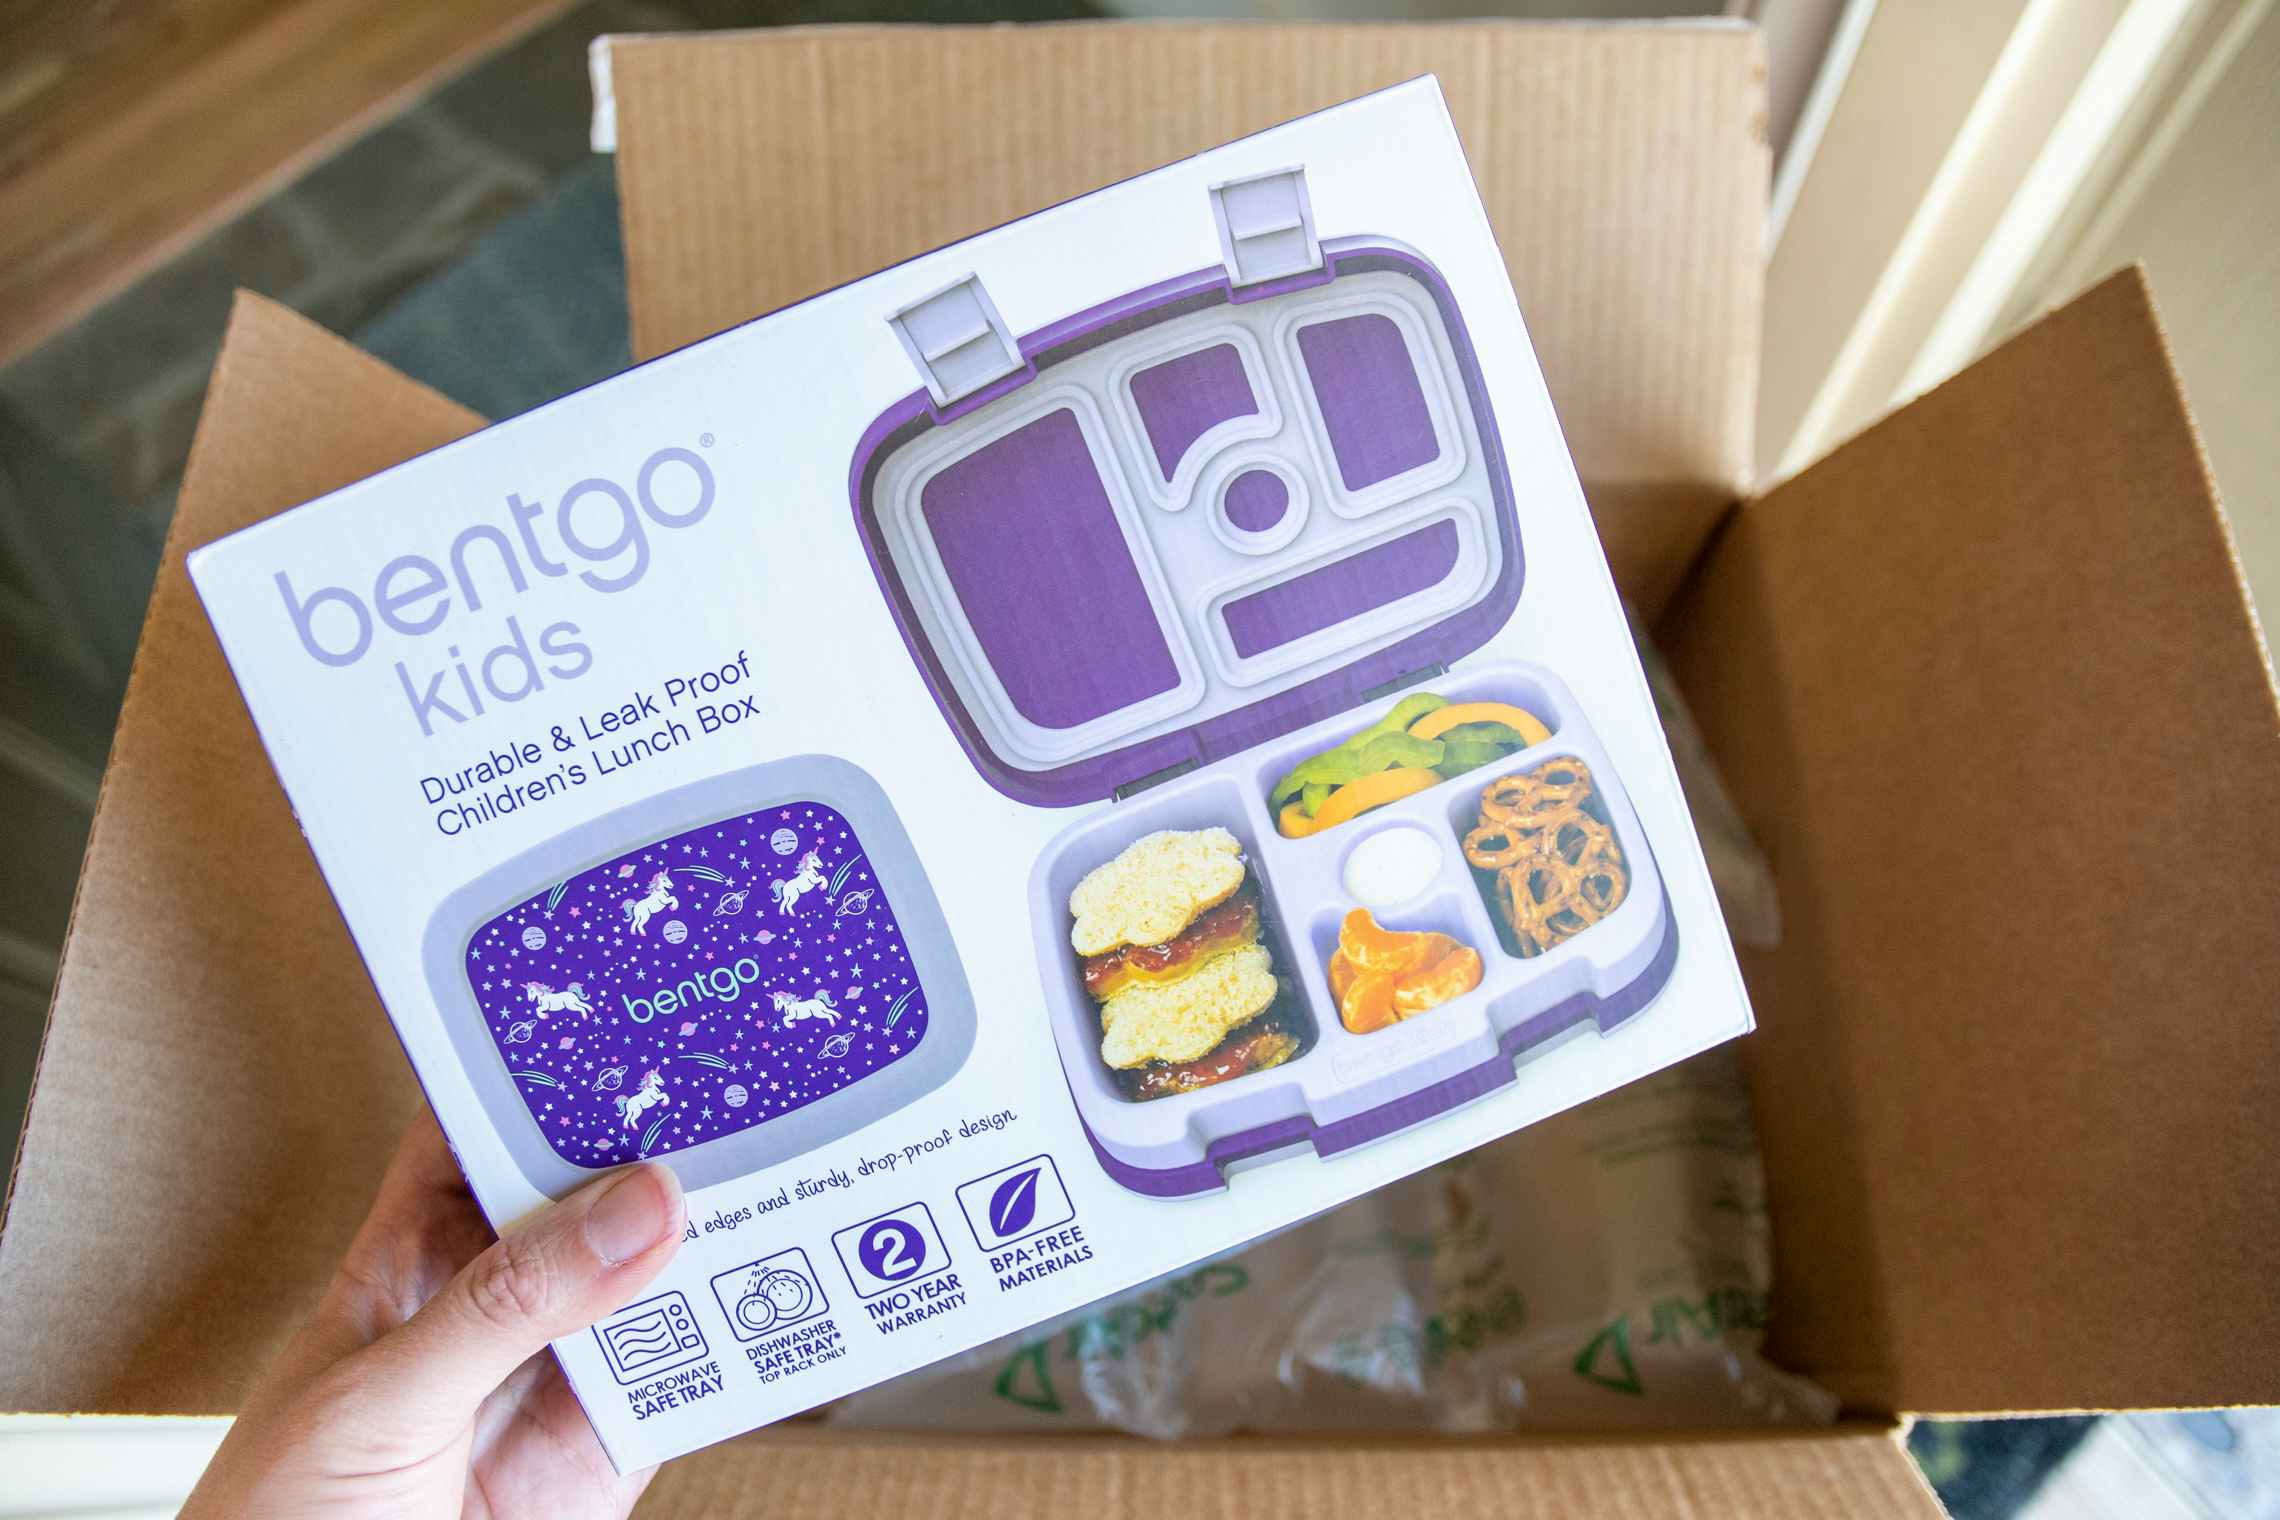 Bentgo kids lunch box being pulled from an amazon box